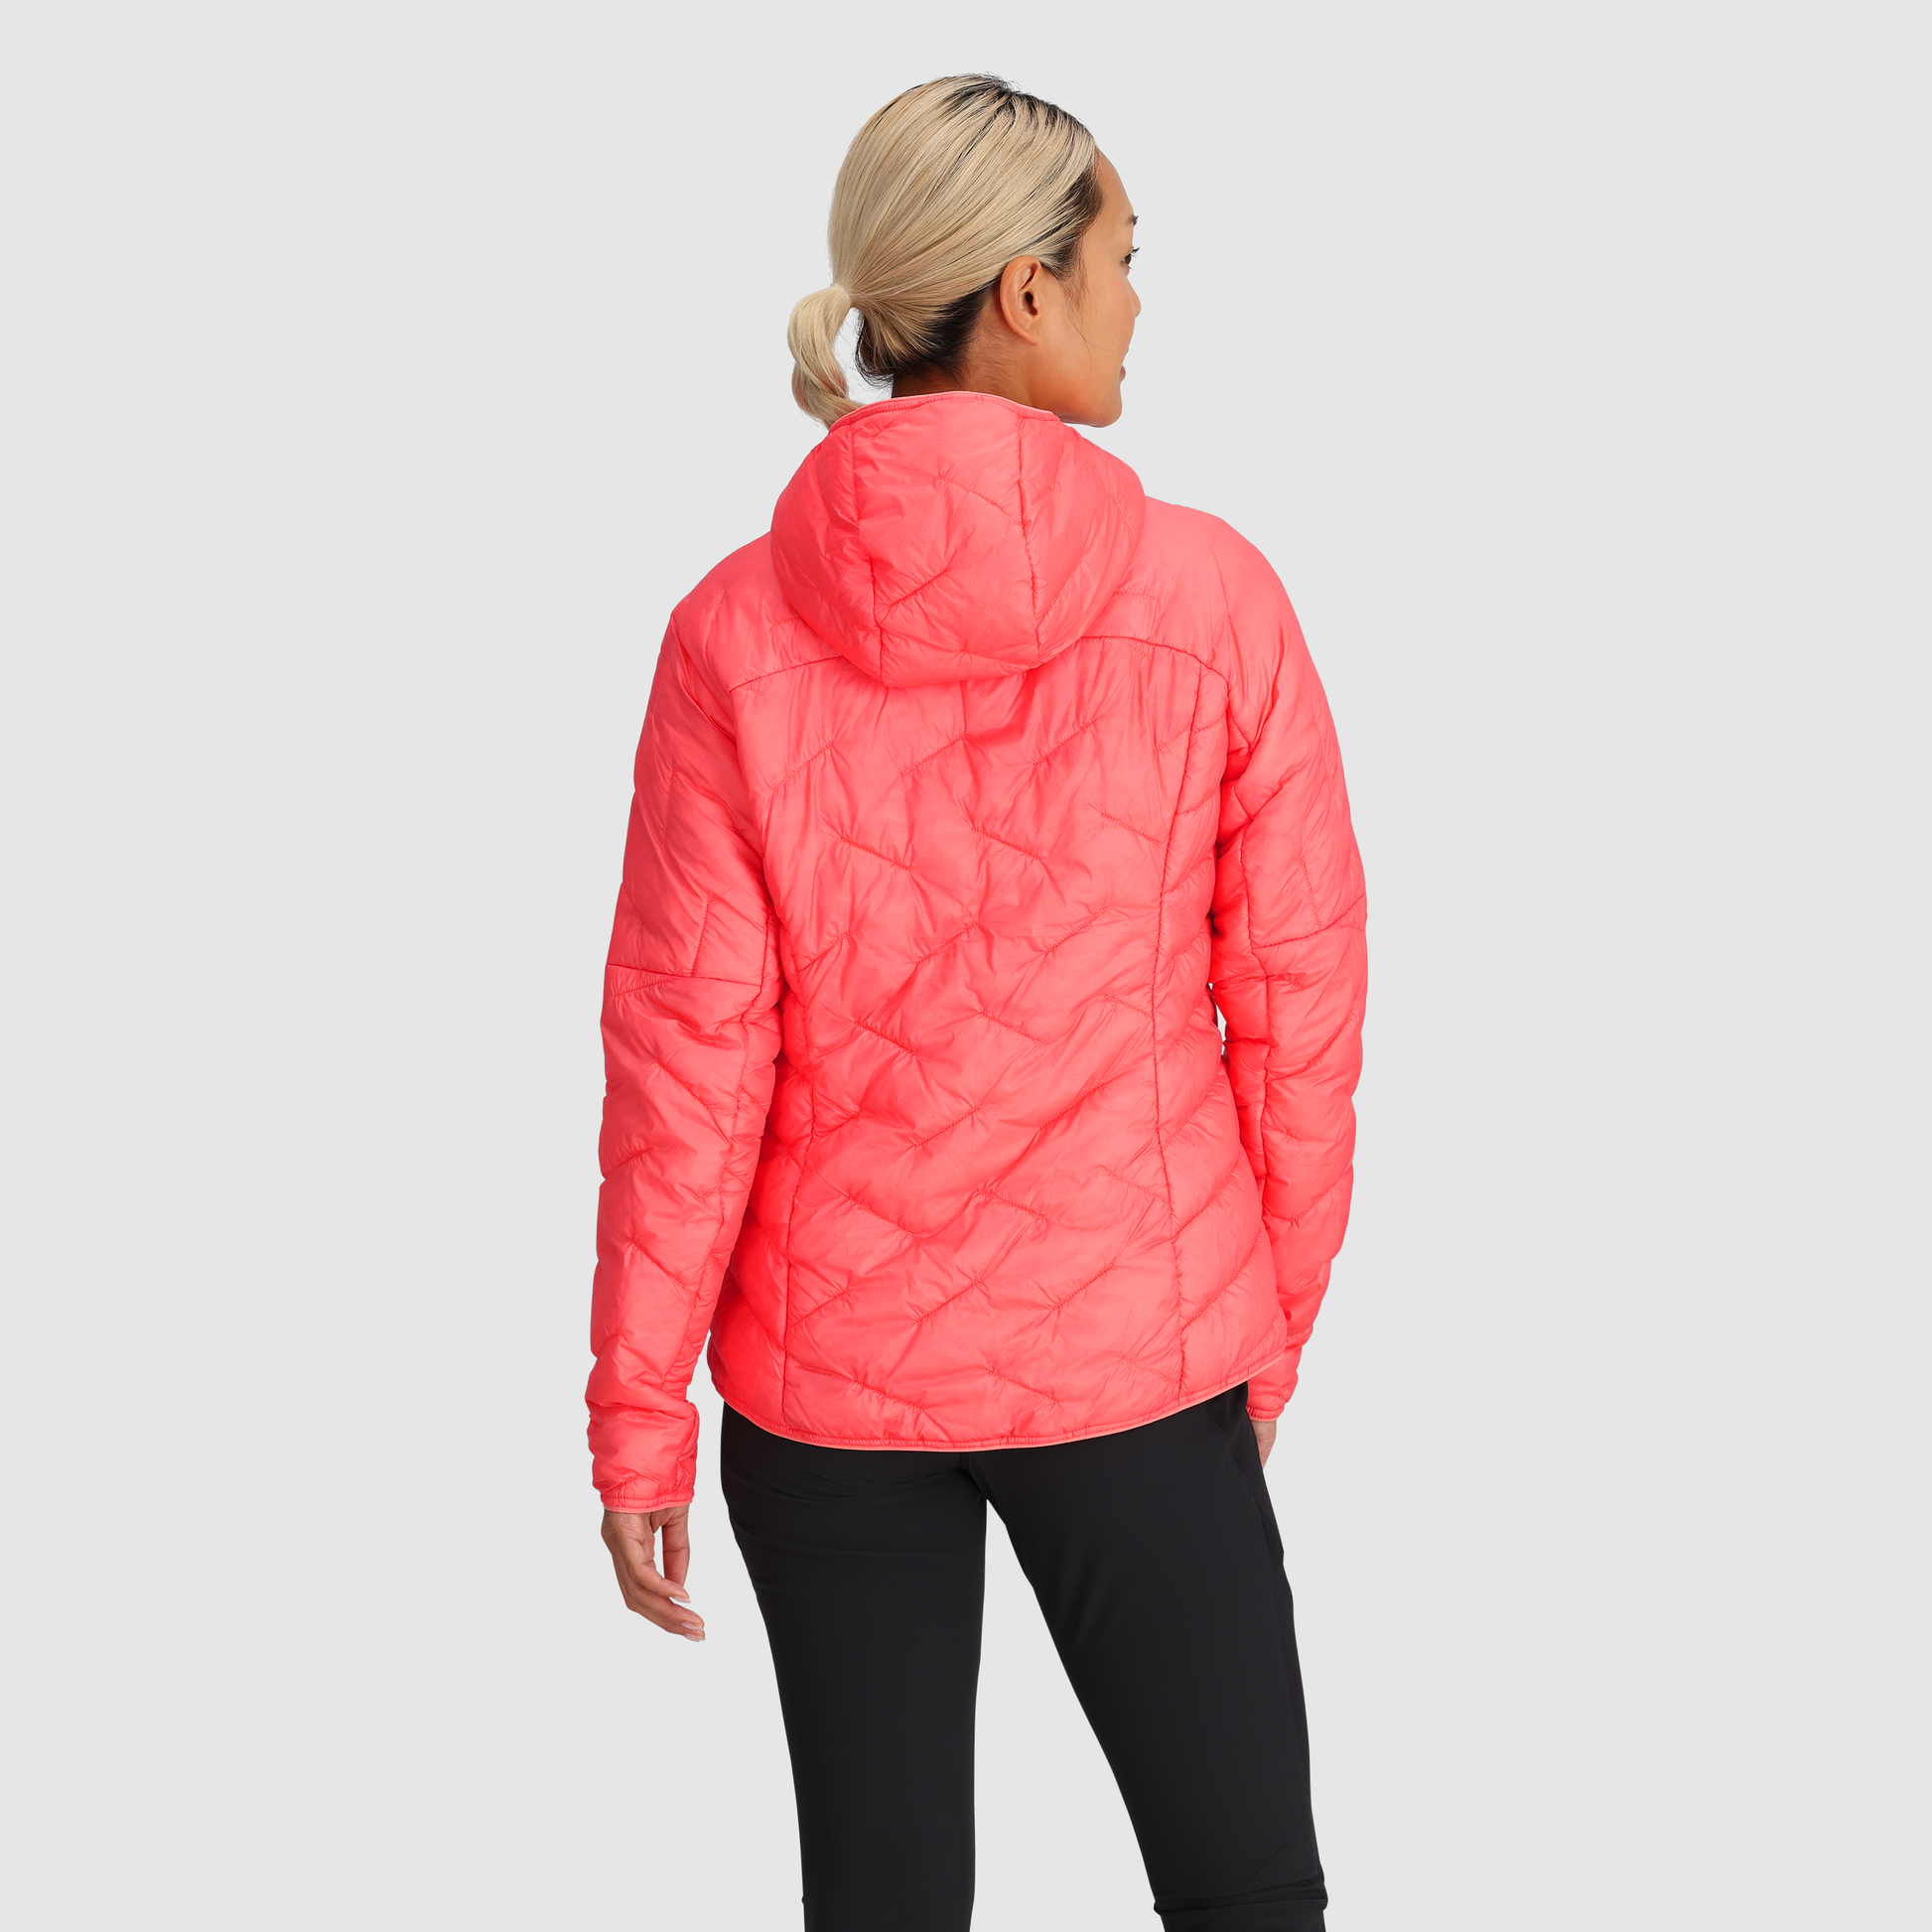 M's ExStream Pull Over Insulated Hoody